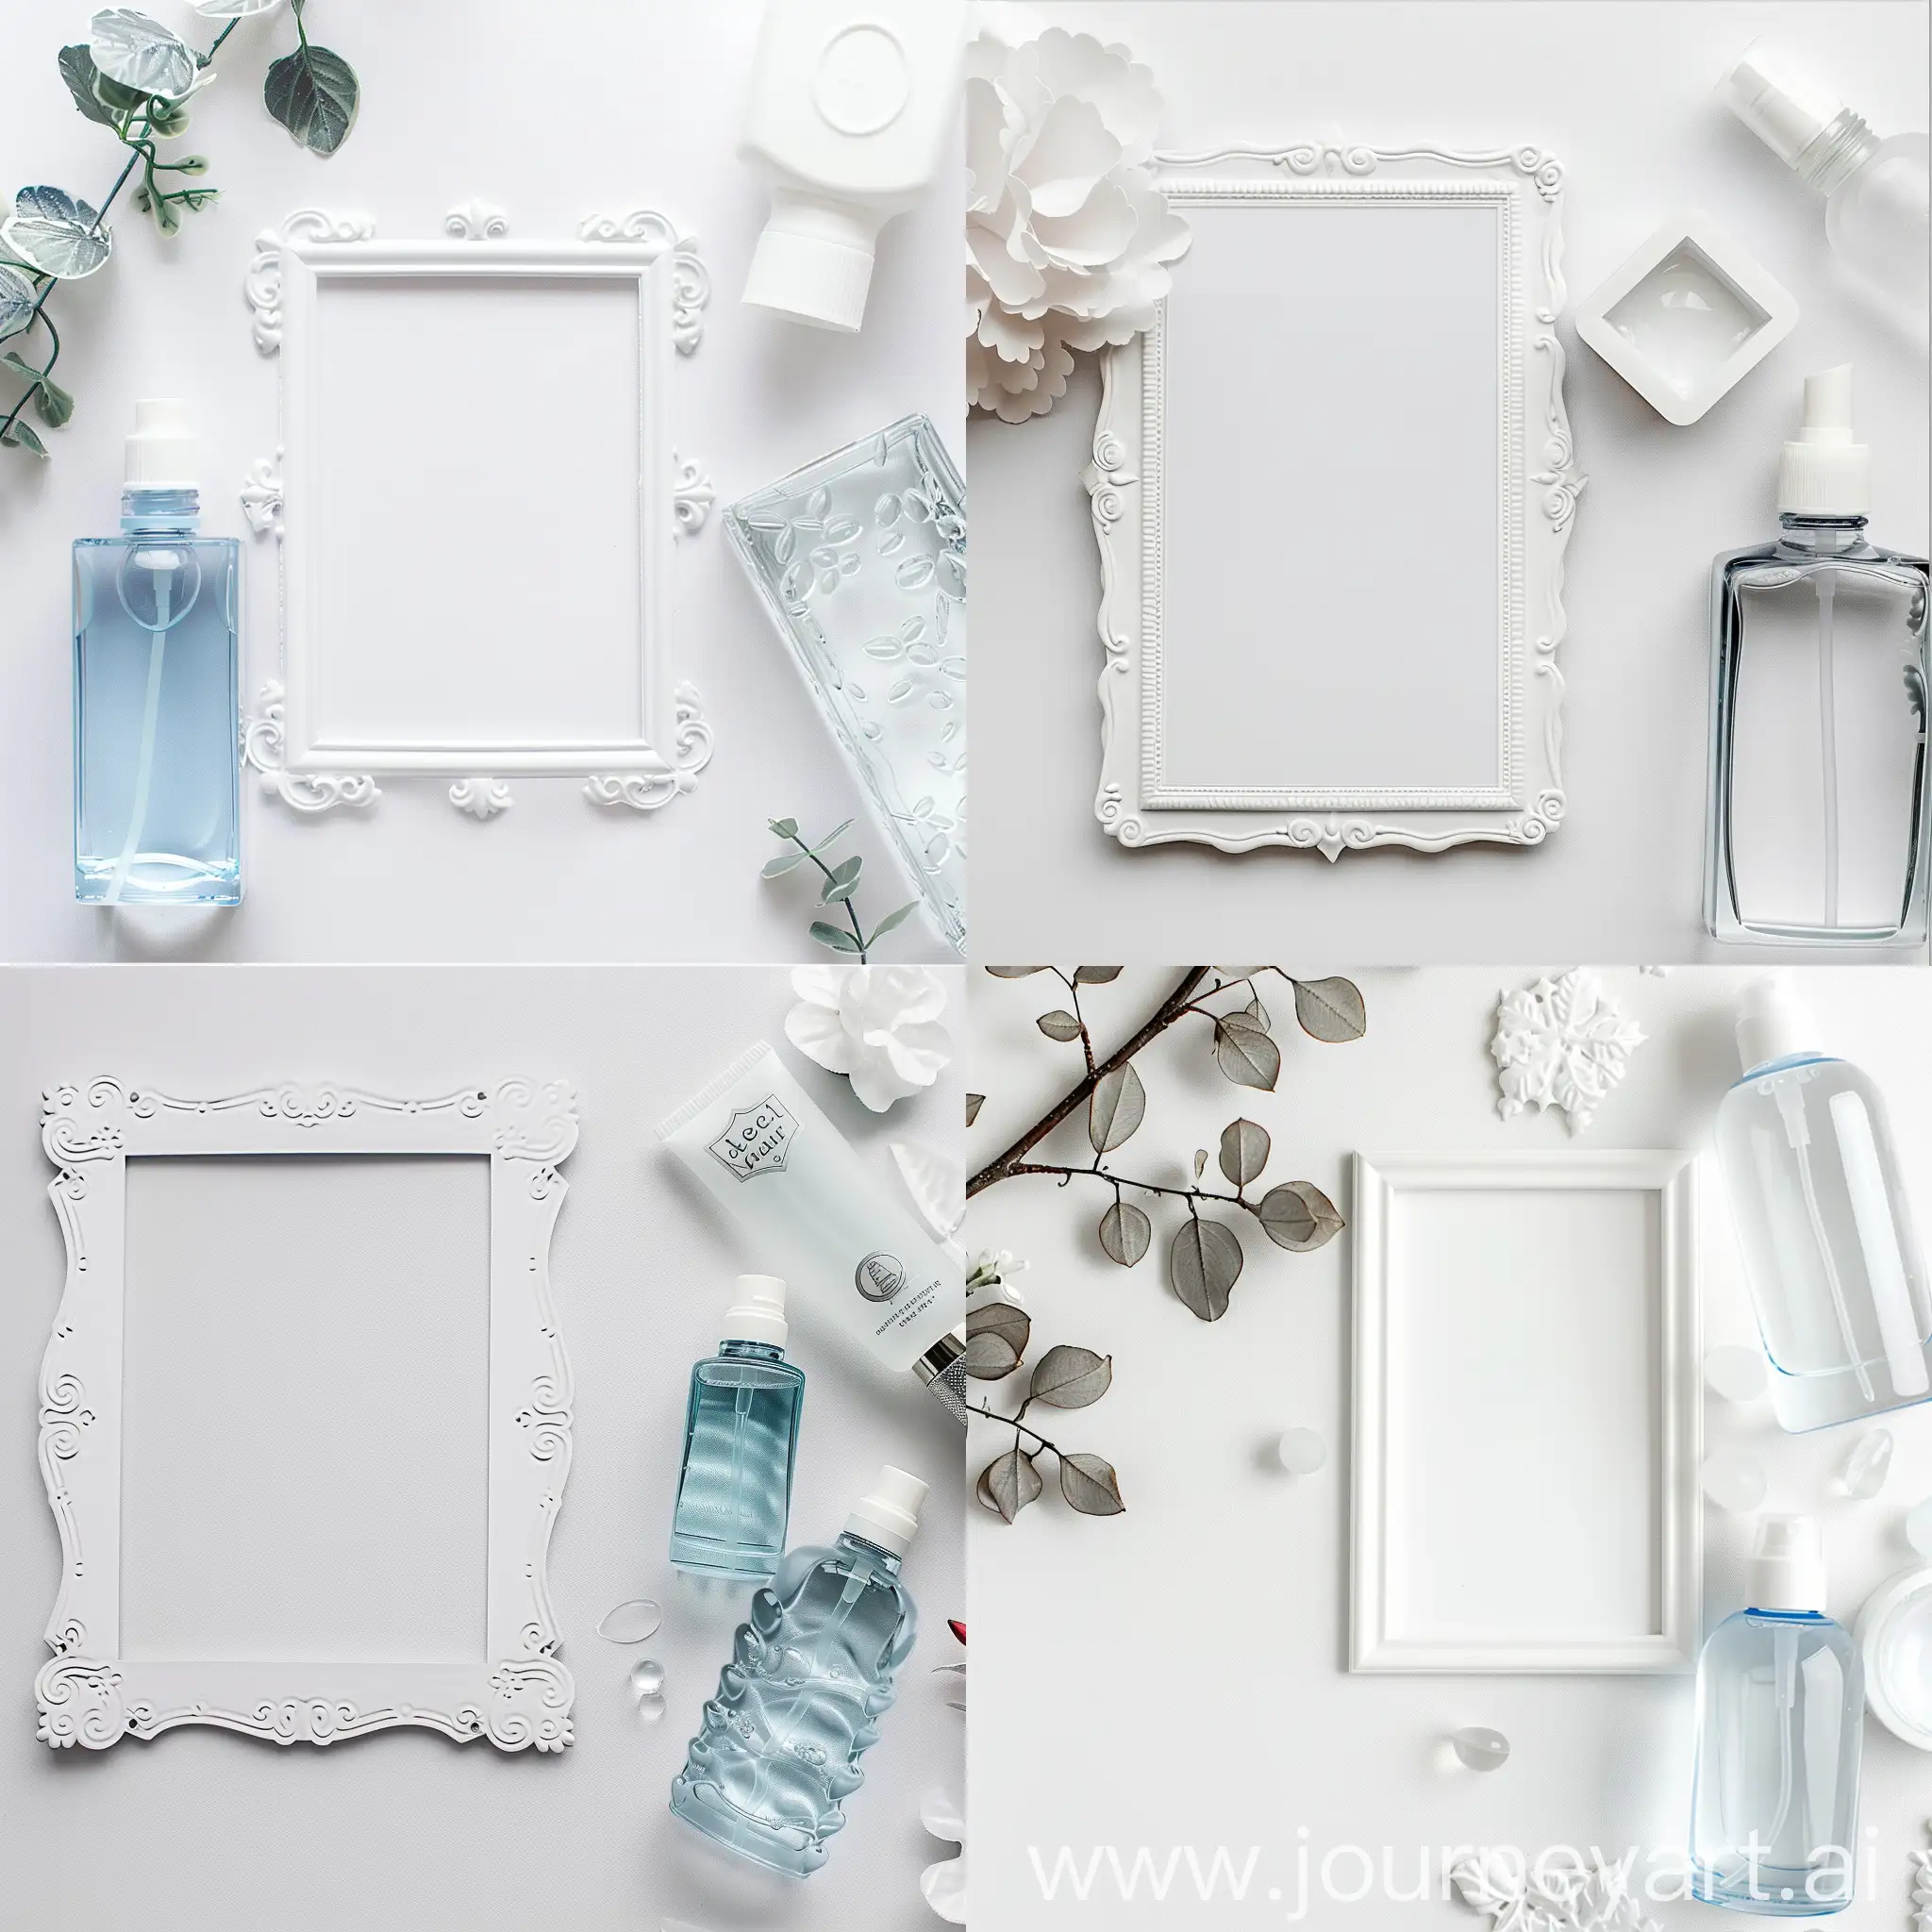 A beautiful flyer for Instagram with a white background, on the right side of the photo is a cosmetic product toner and on the right side a micellar water, a white frame decorated around the frame is in the middle